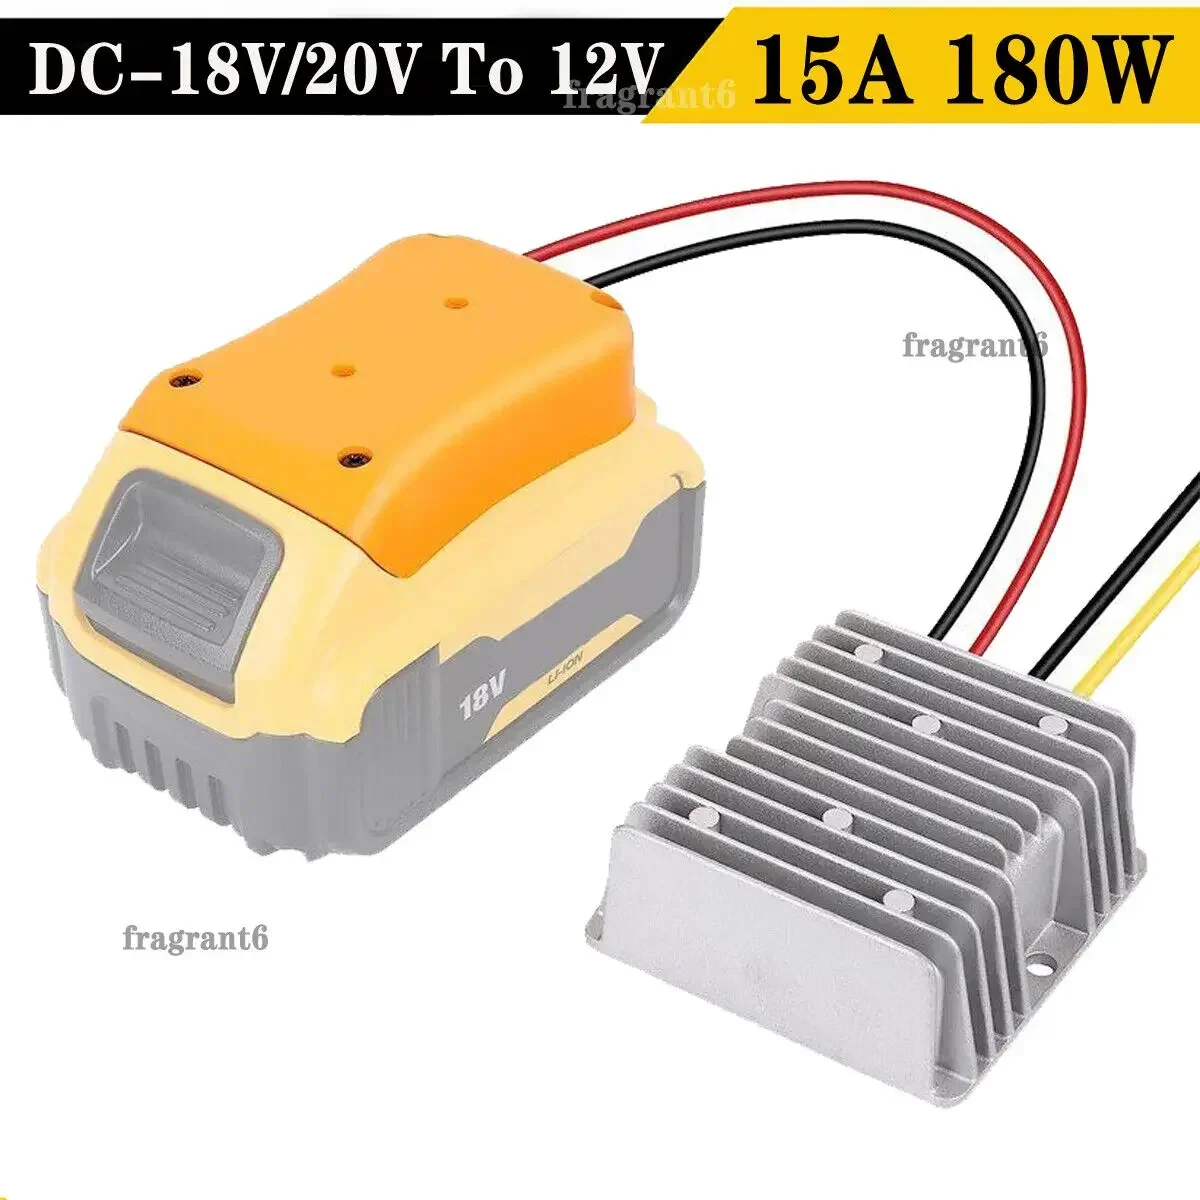 Step Down Converter 20V To 12V Adapter for Dewalt 20V Li-ion Battery 15A 180W Adapter Automatic Buck Boost Converter Regulator step down dc 18v to dc 12v converter for makita 18v li ion battery 180w diy automatic buck boost converter voltage regulator